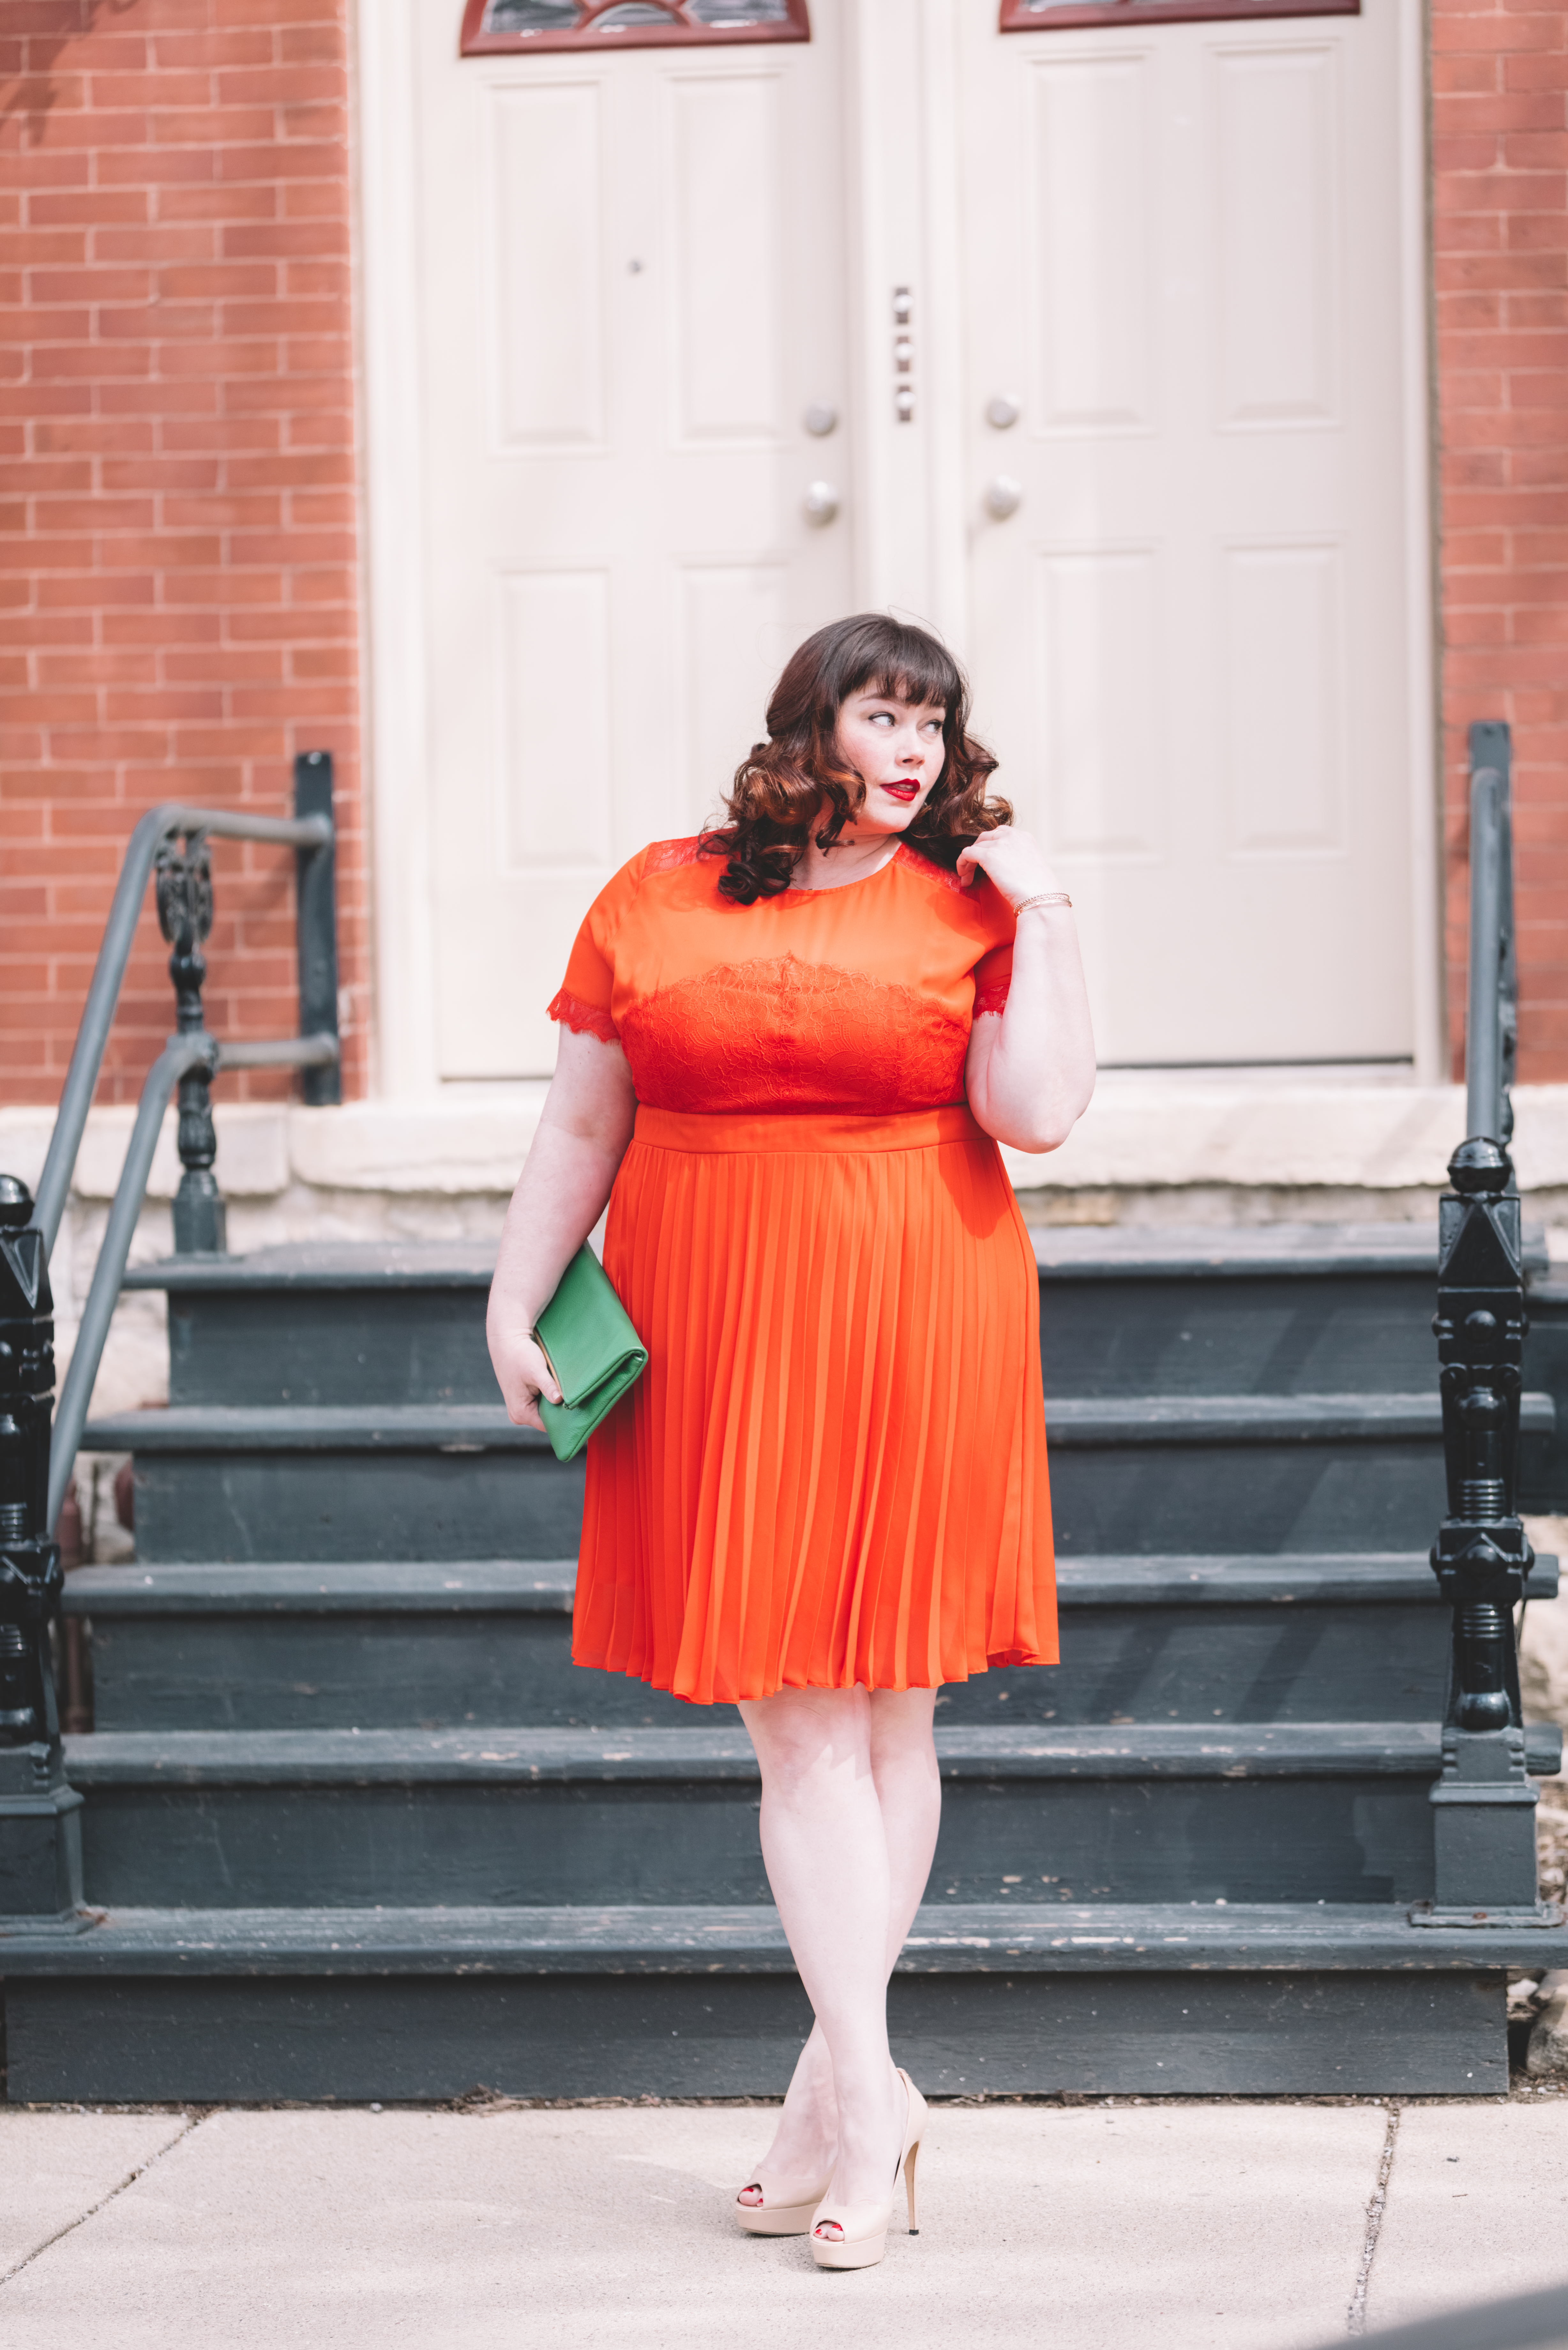 Plus Size blogger Style Plus Curves in an Orange dress and Green Custom Leather Bag from Laudi Vidni